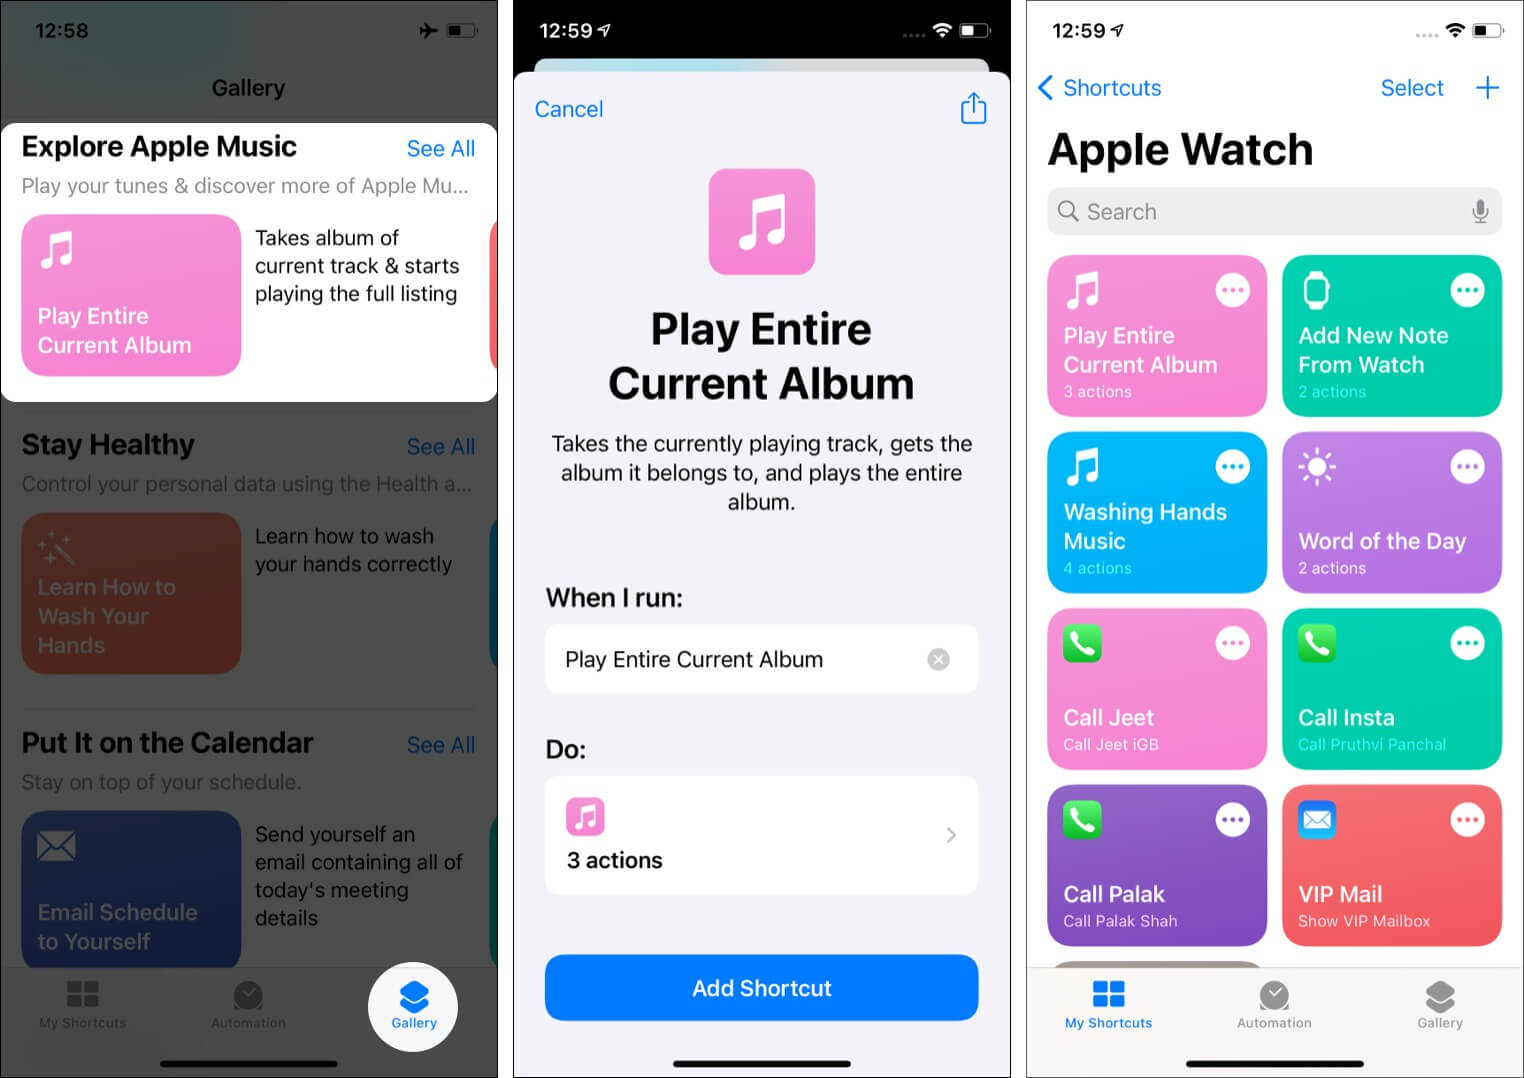 How to add shortcuts to Apple Watch